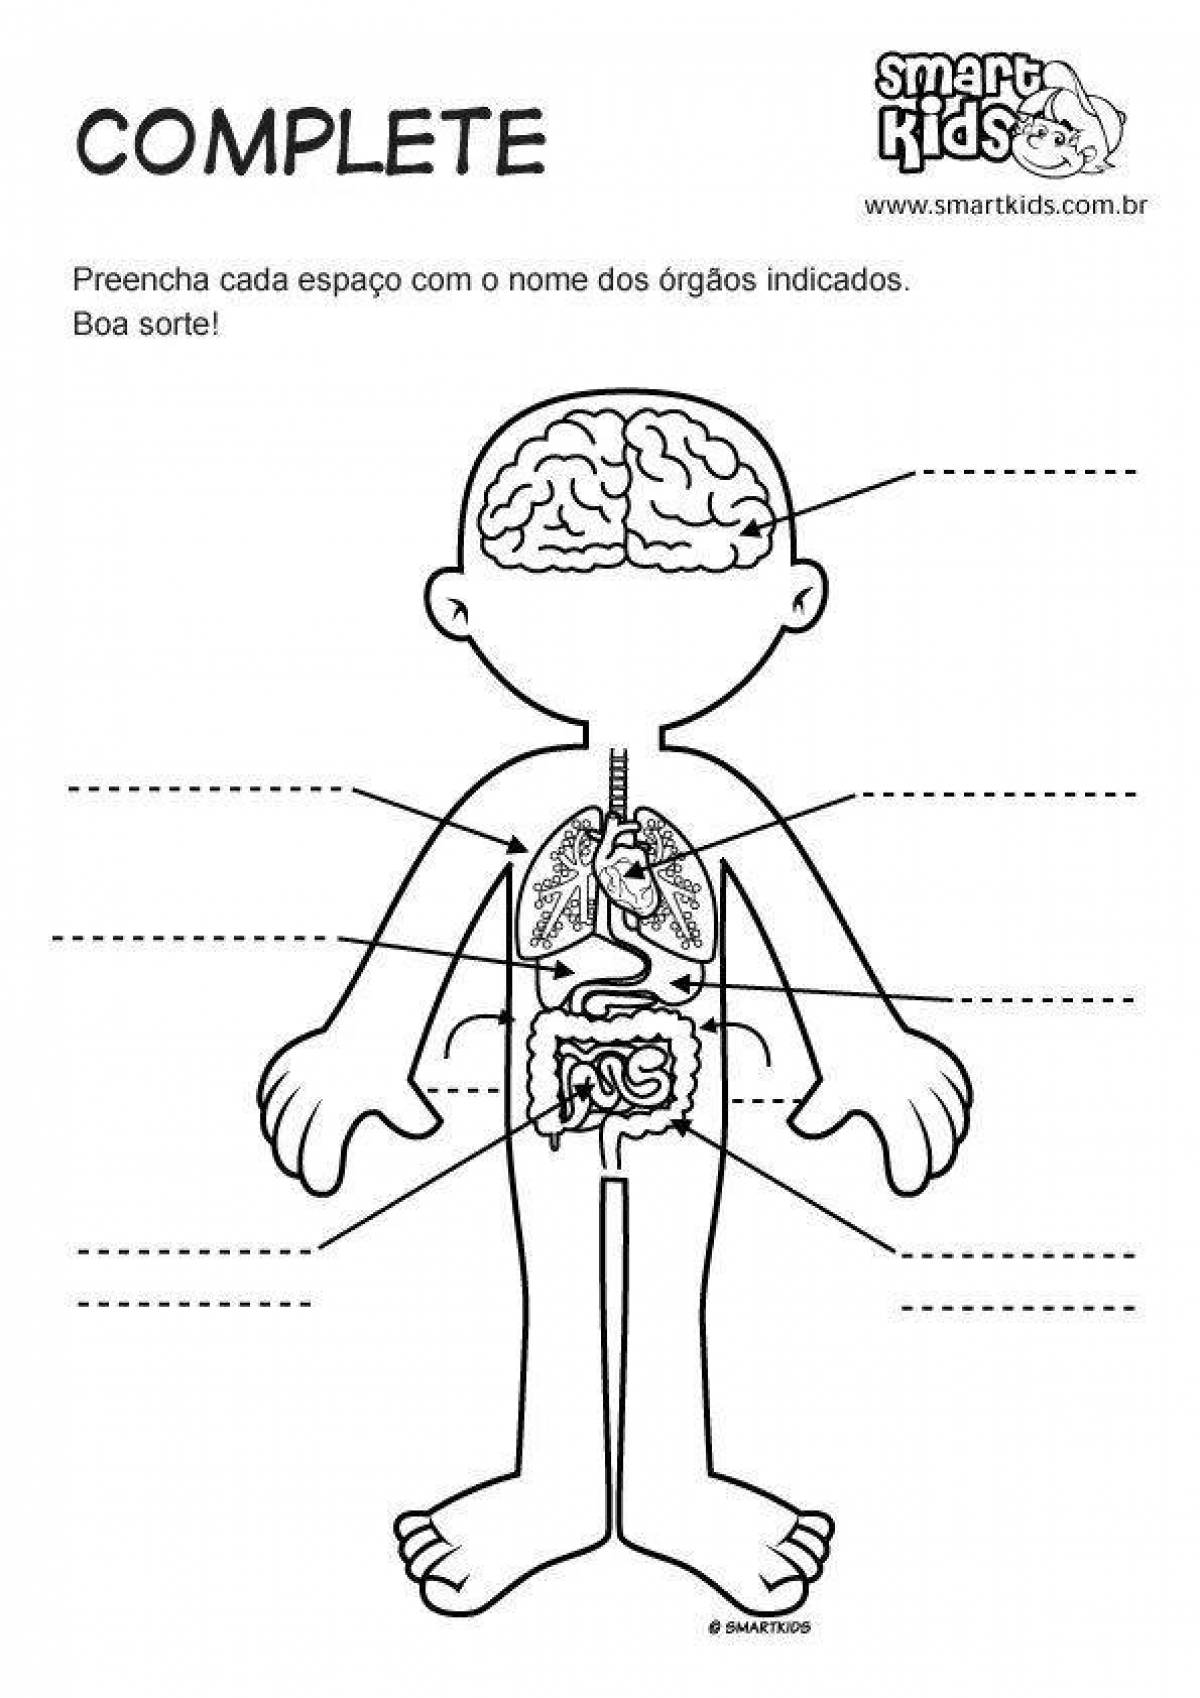 The internal structure of a person Grade 2 #25